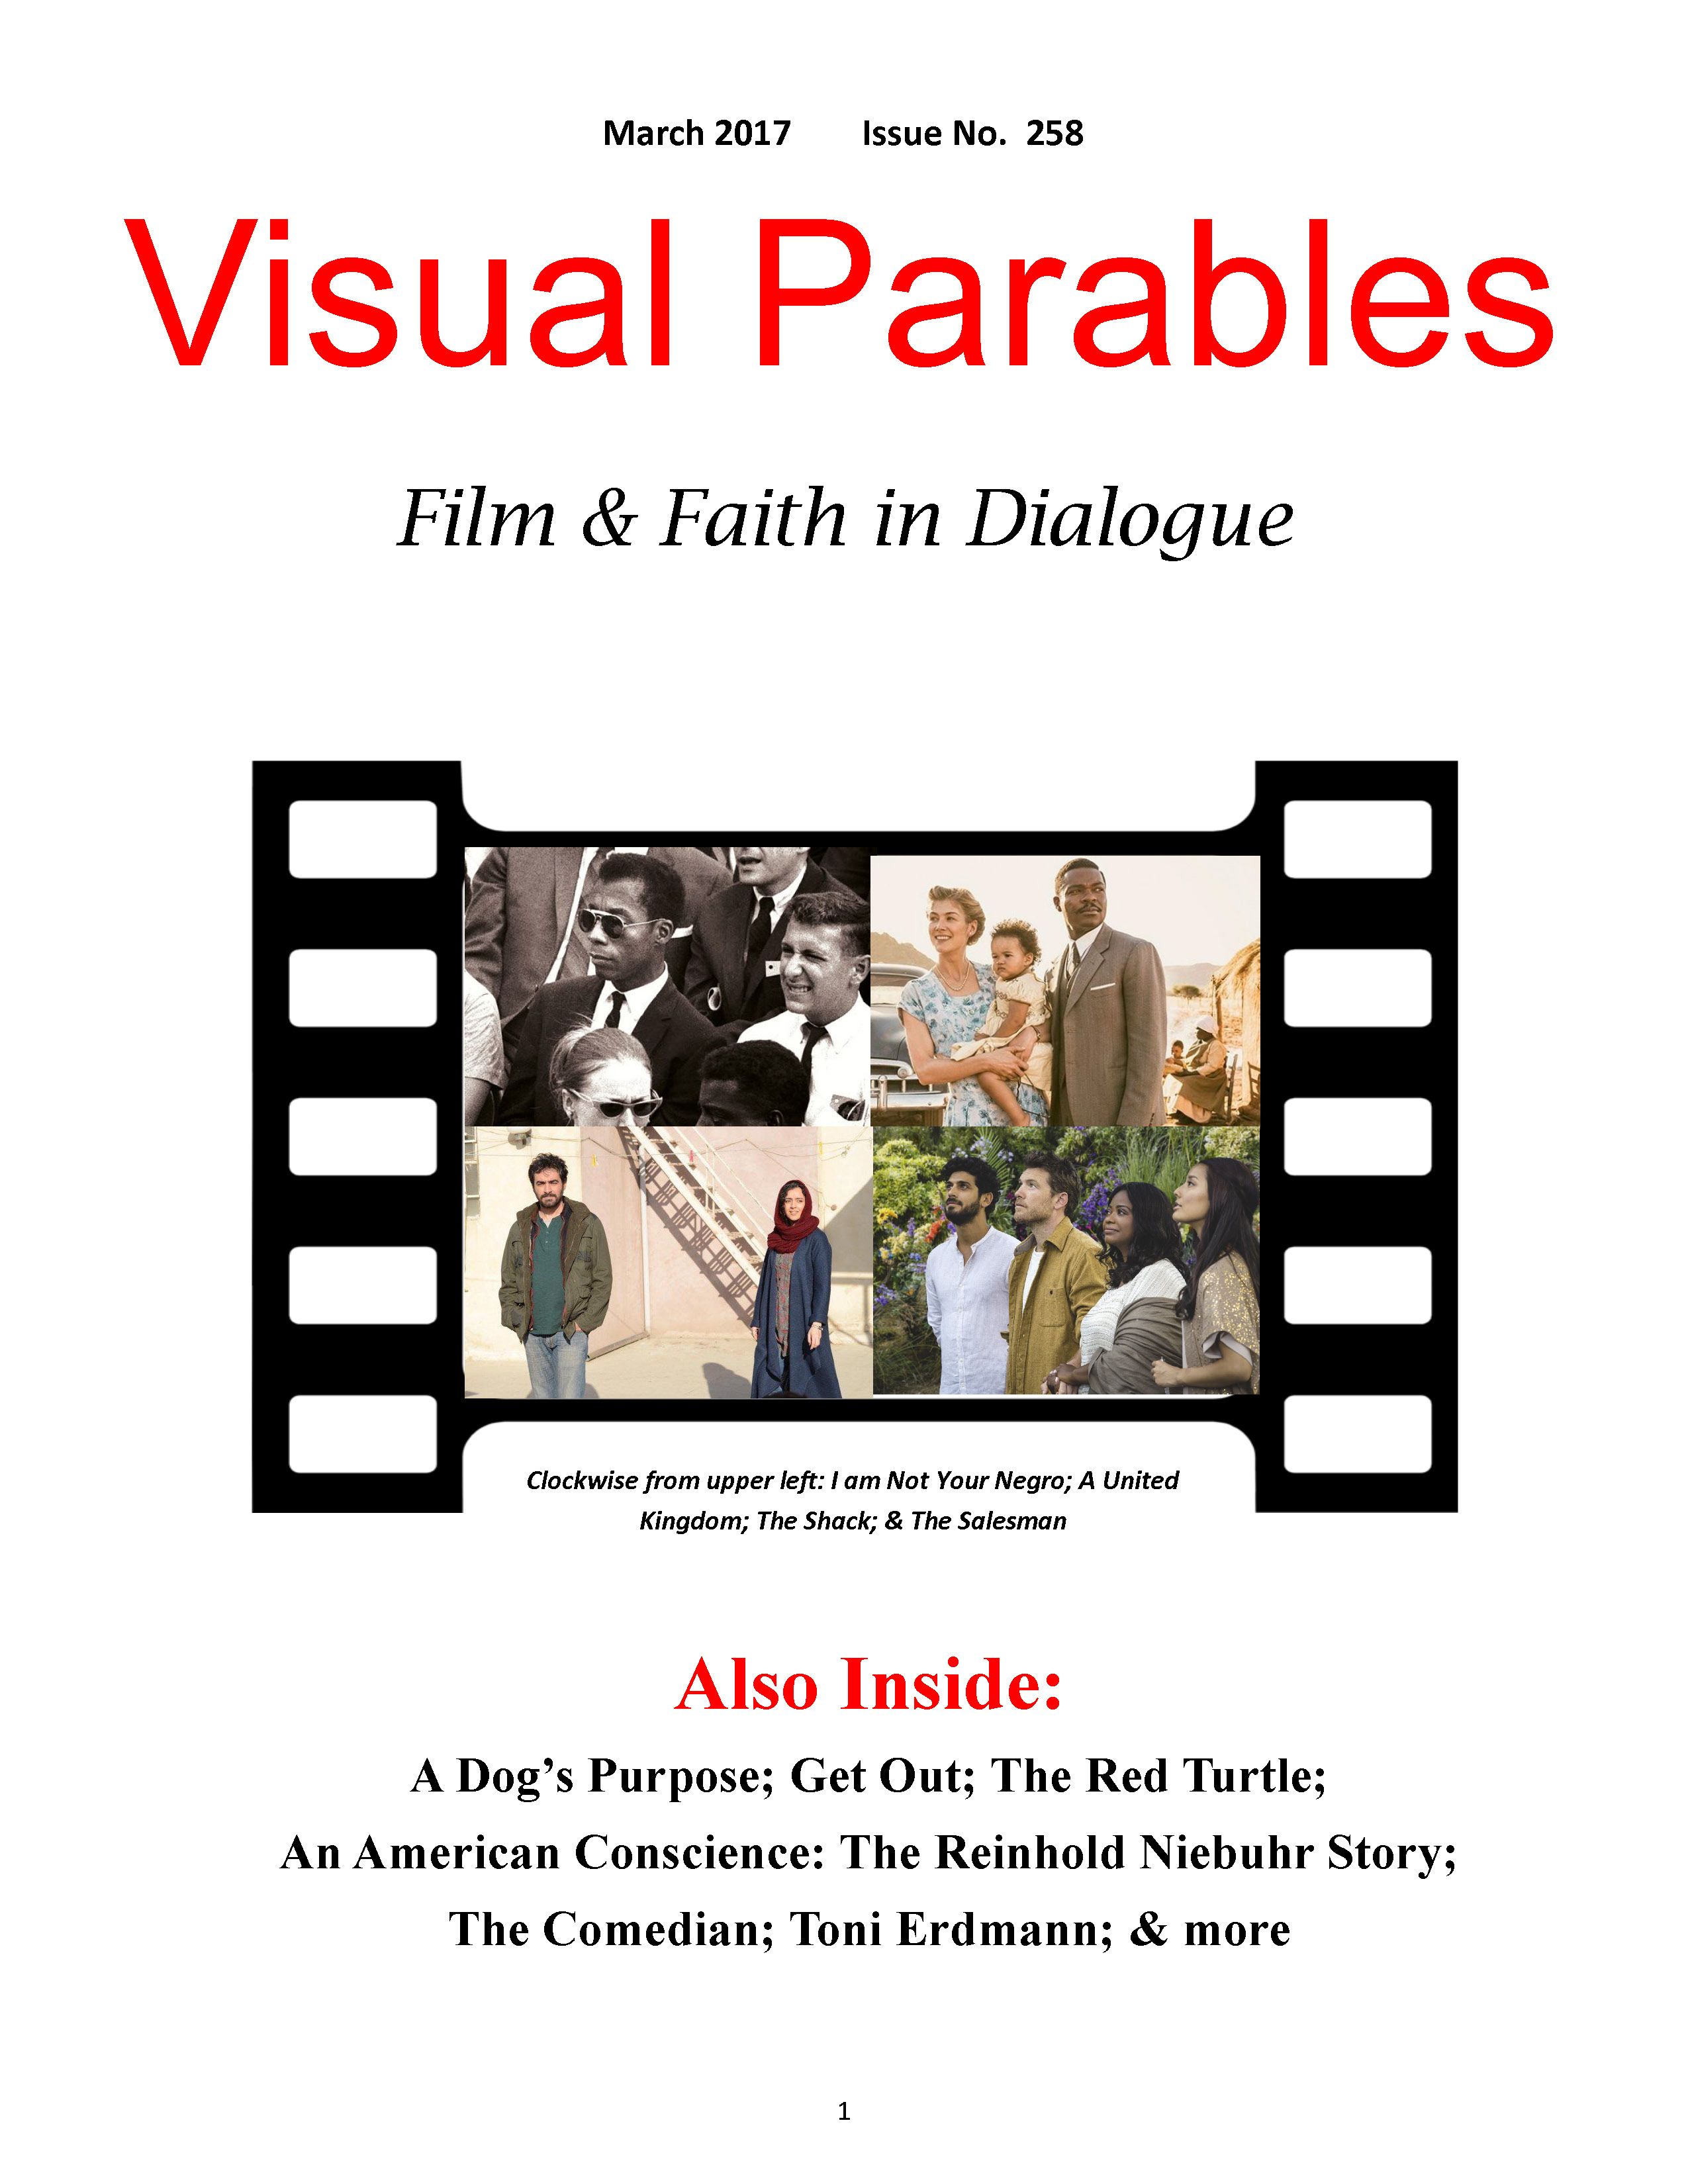 March 2017 issue of Visual Parables